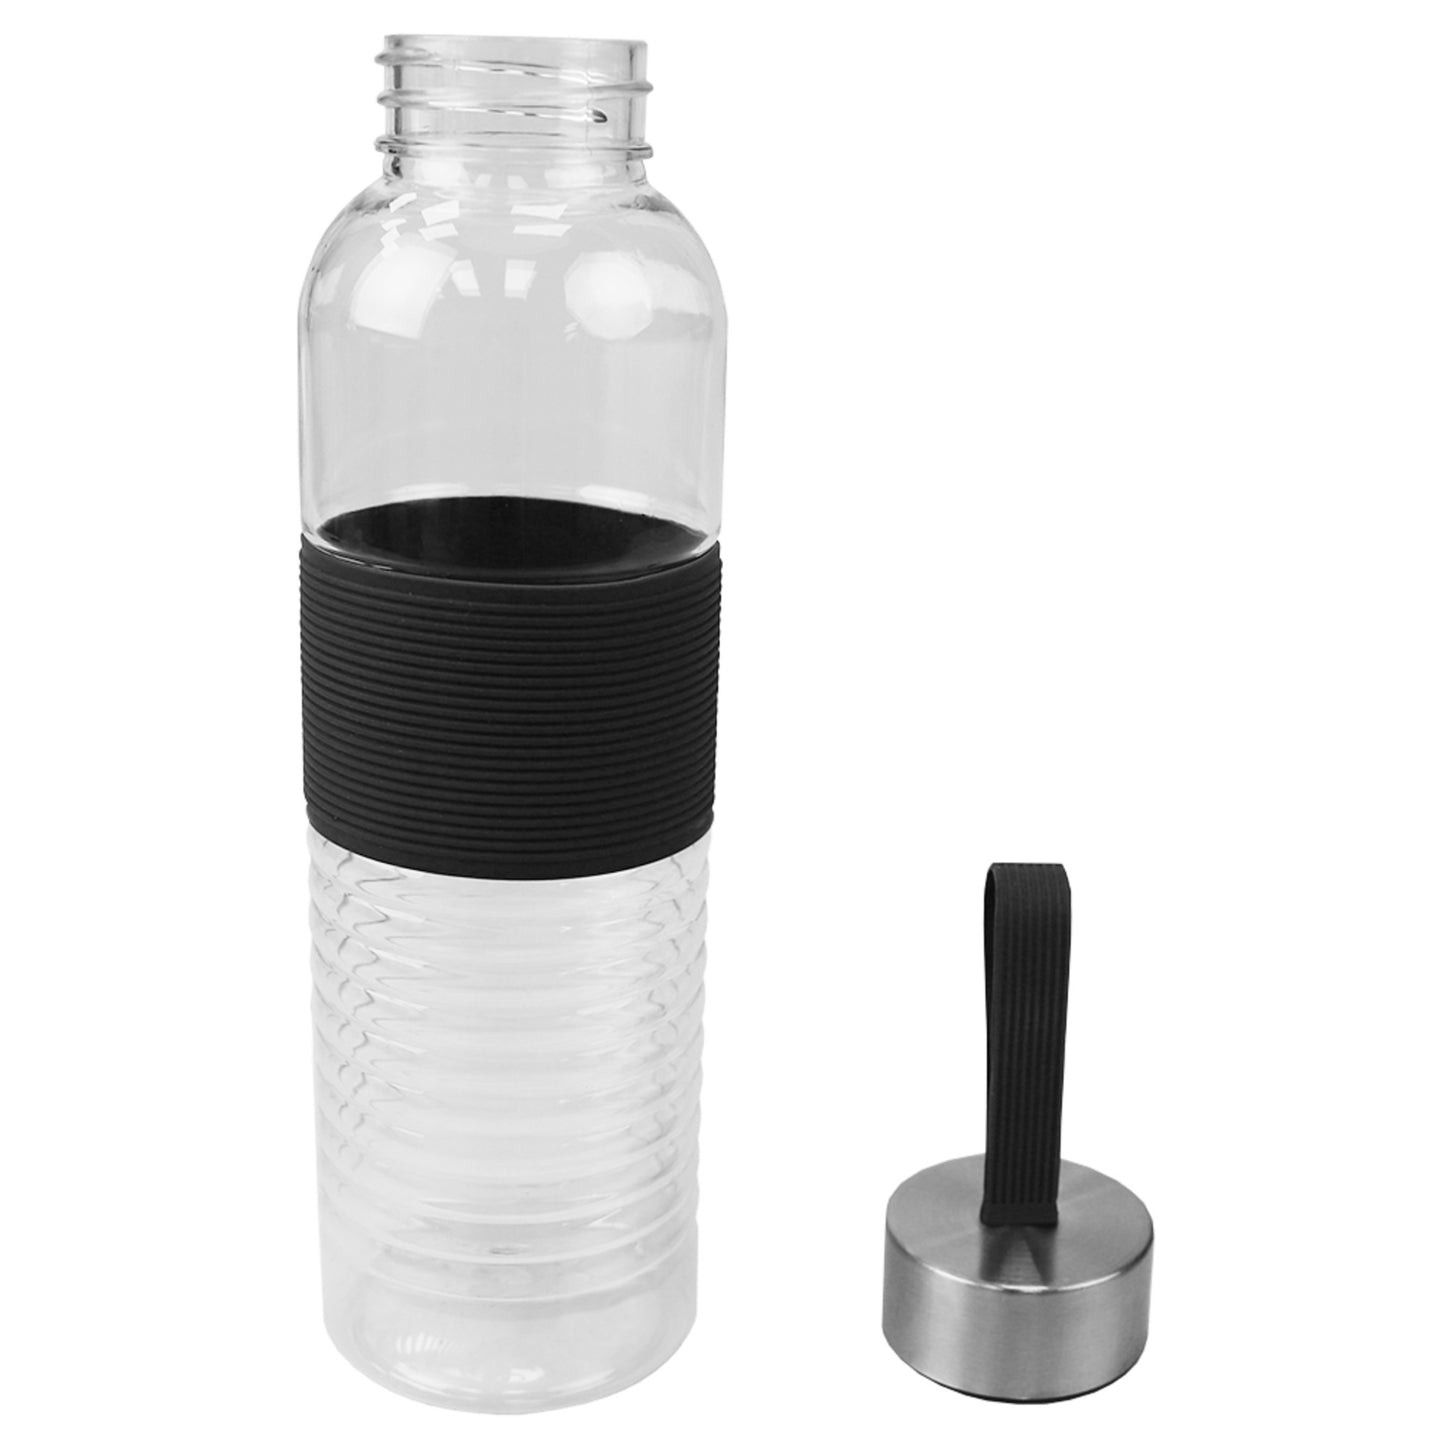 Home Basics 20 Oz. Plastic Travel Bottle with Built-in Carrying Strap and Textured Grip, Black - Black